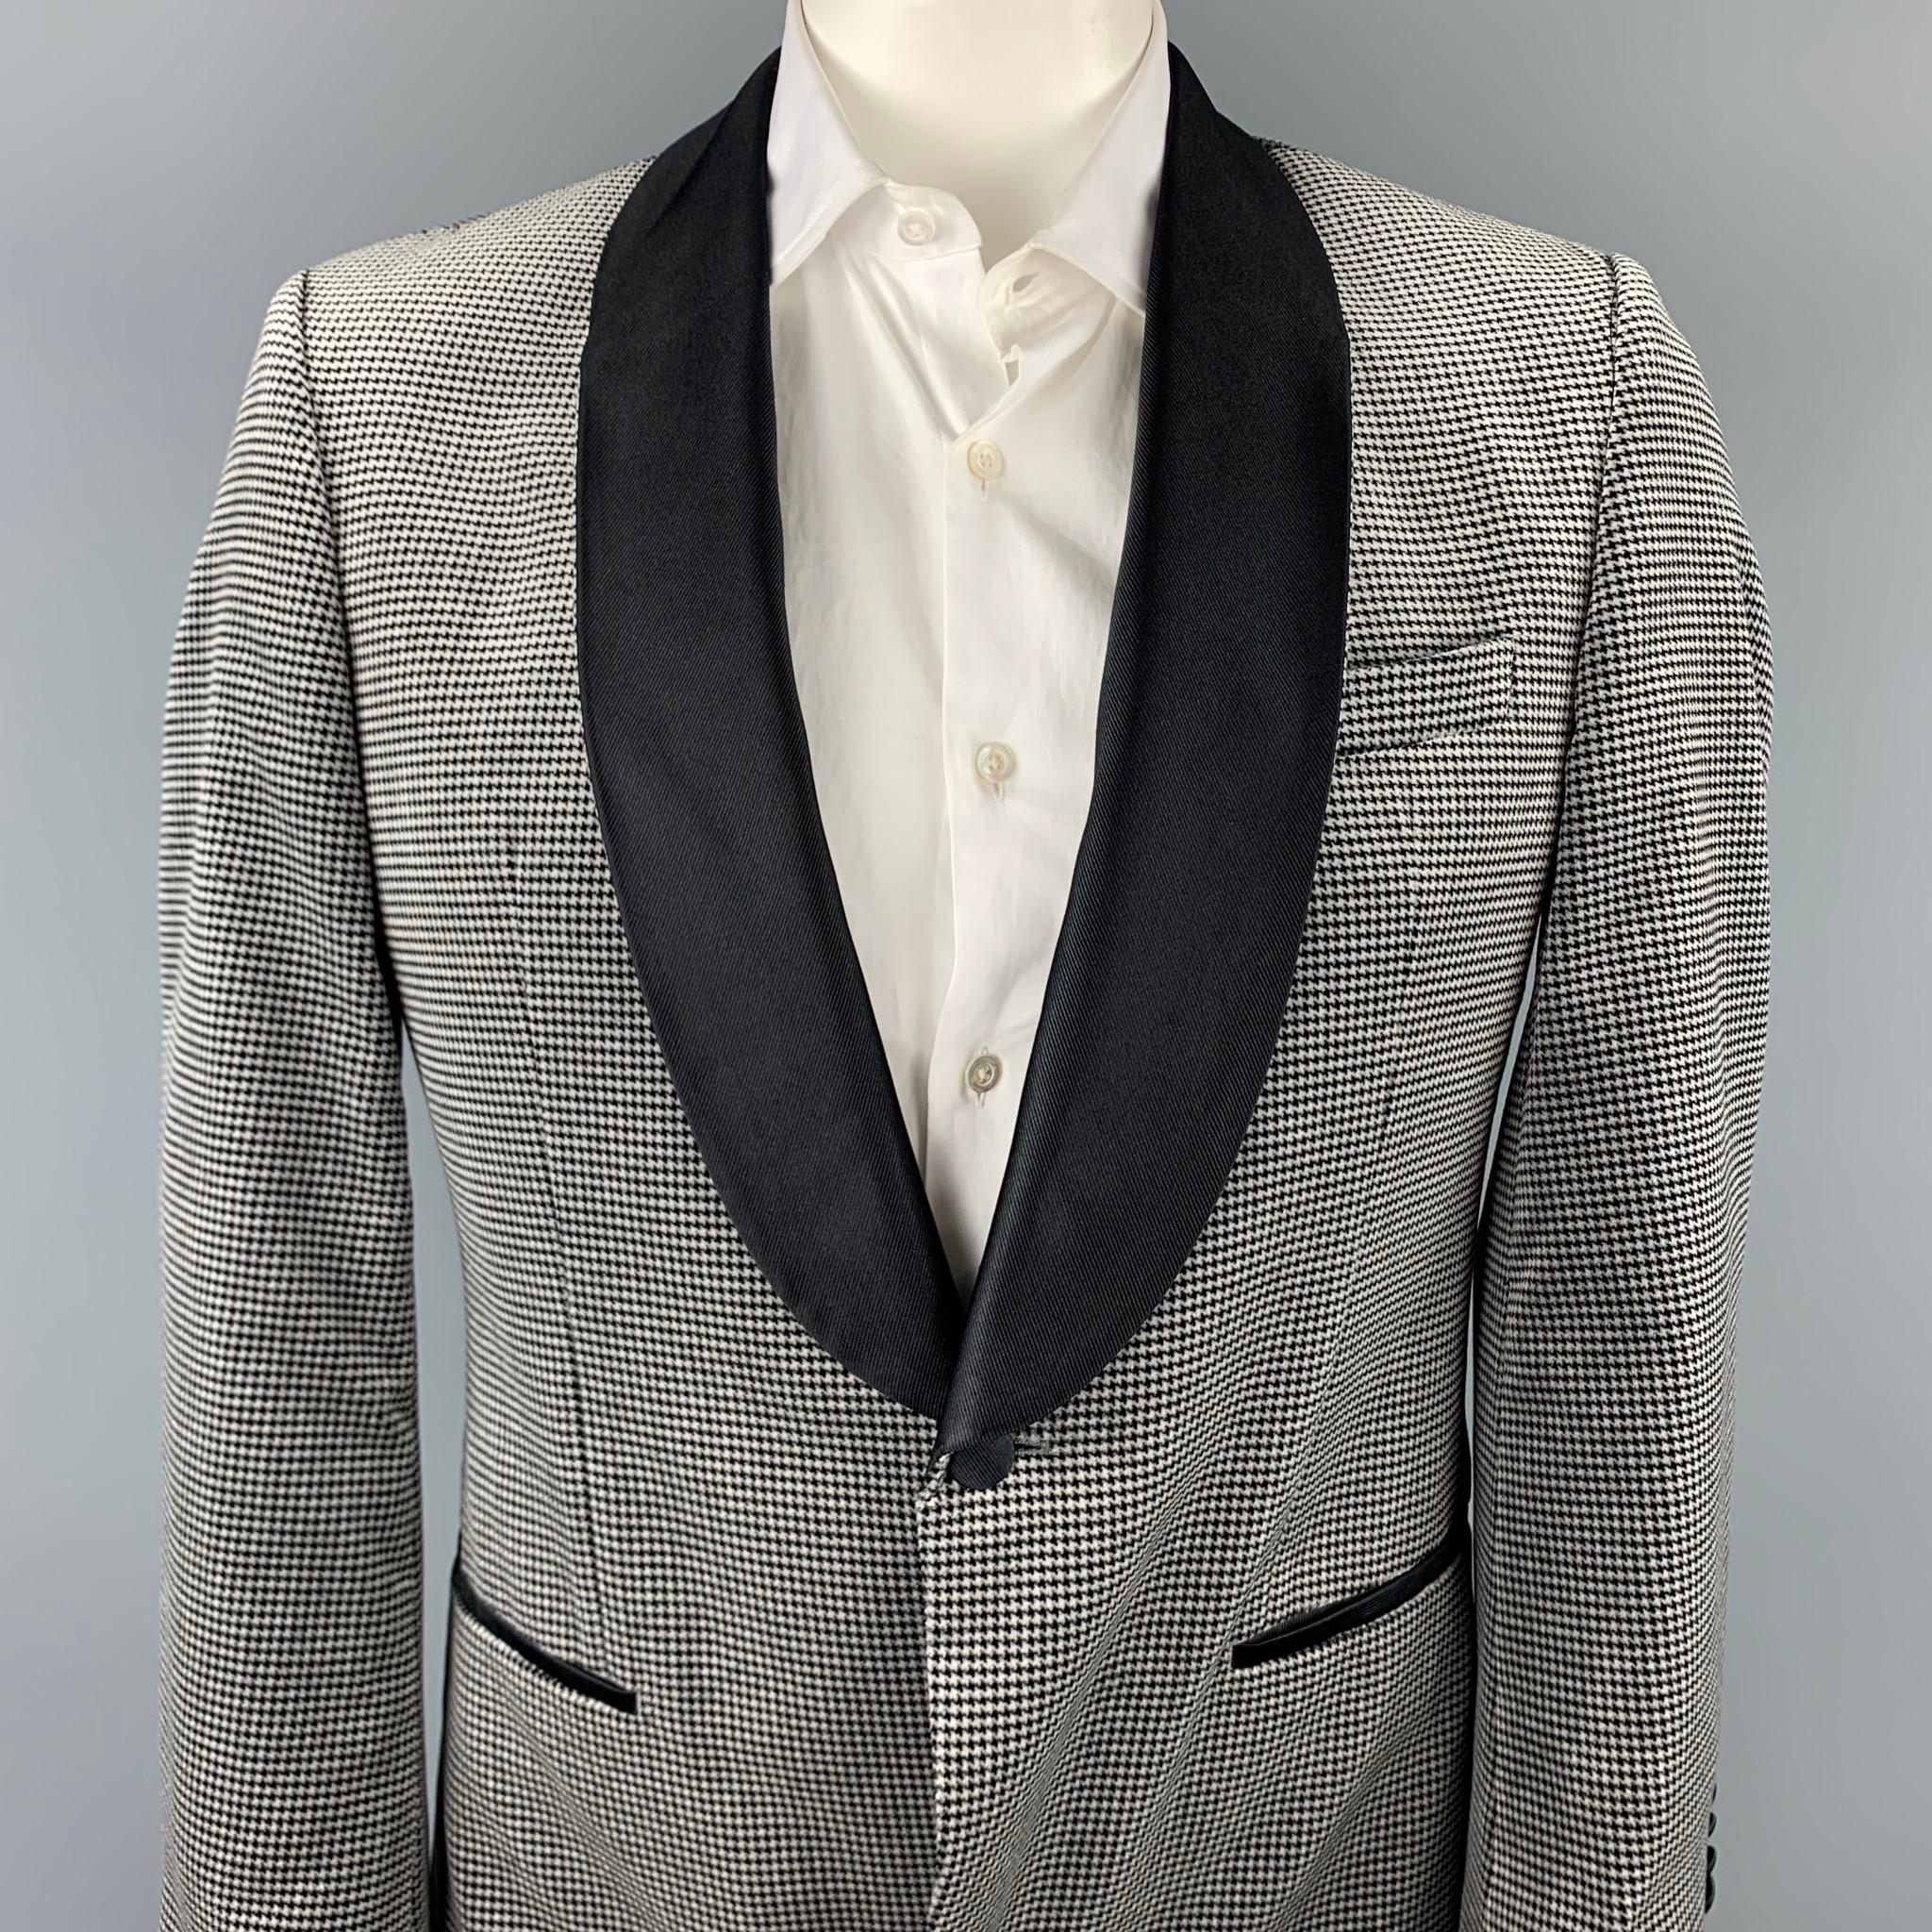 HUGO BOSS sport coat comes in a grey & black houndstooth cotton velvet with a full black liner featuring a shawl lapel, slit pockets, and a single button closure. 

Very Good Pre-Owned Condition.
Marked: 42 R

Measurements:

Shoulder: 18.5